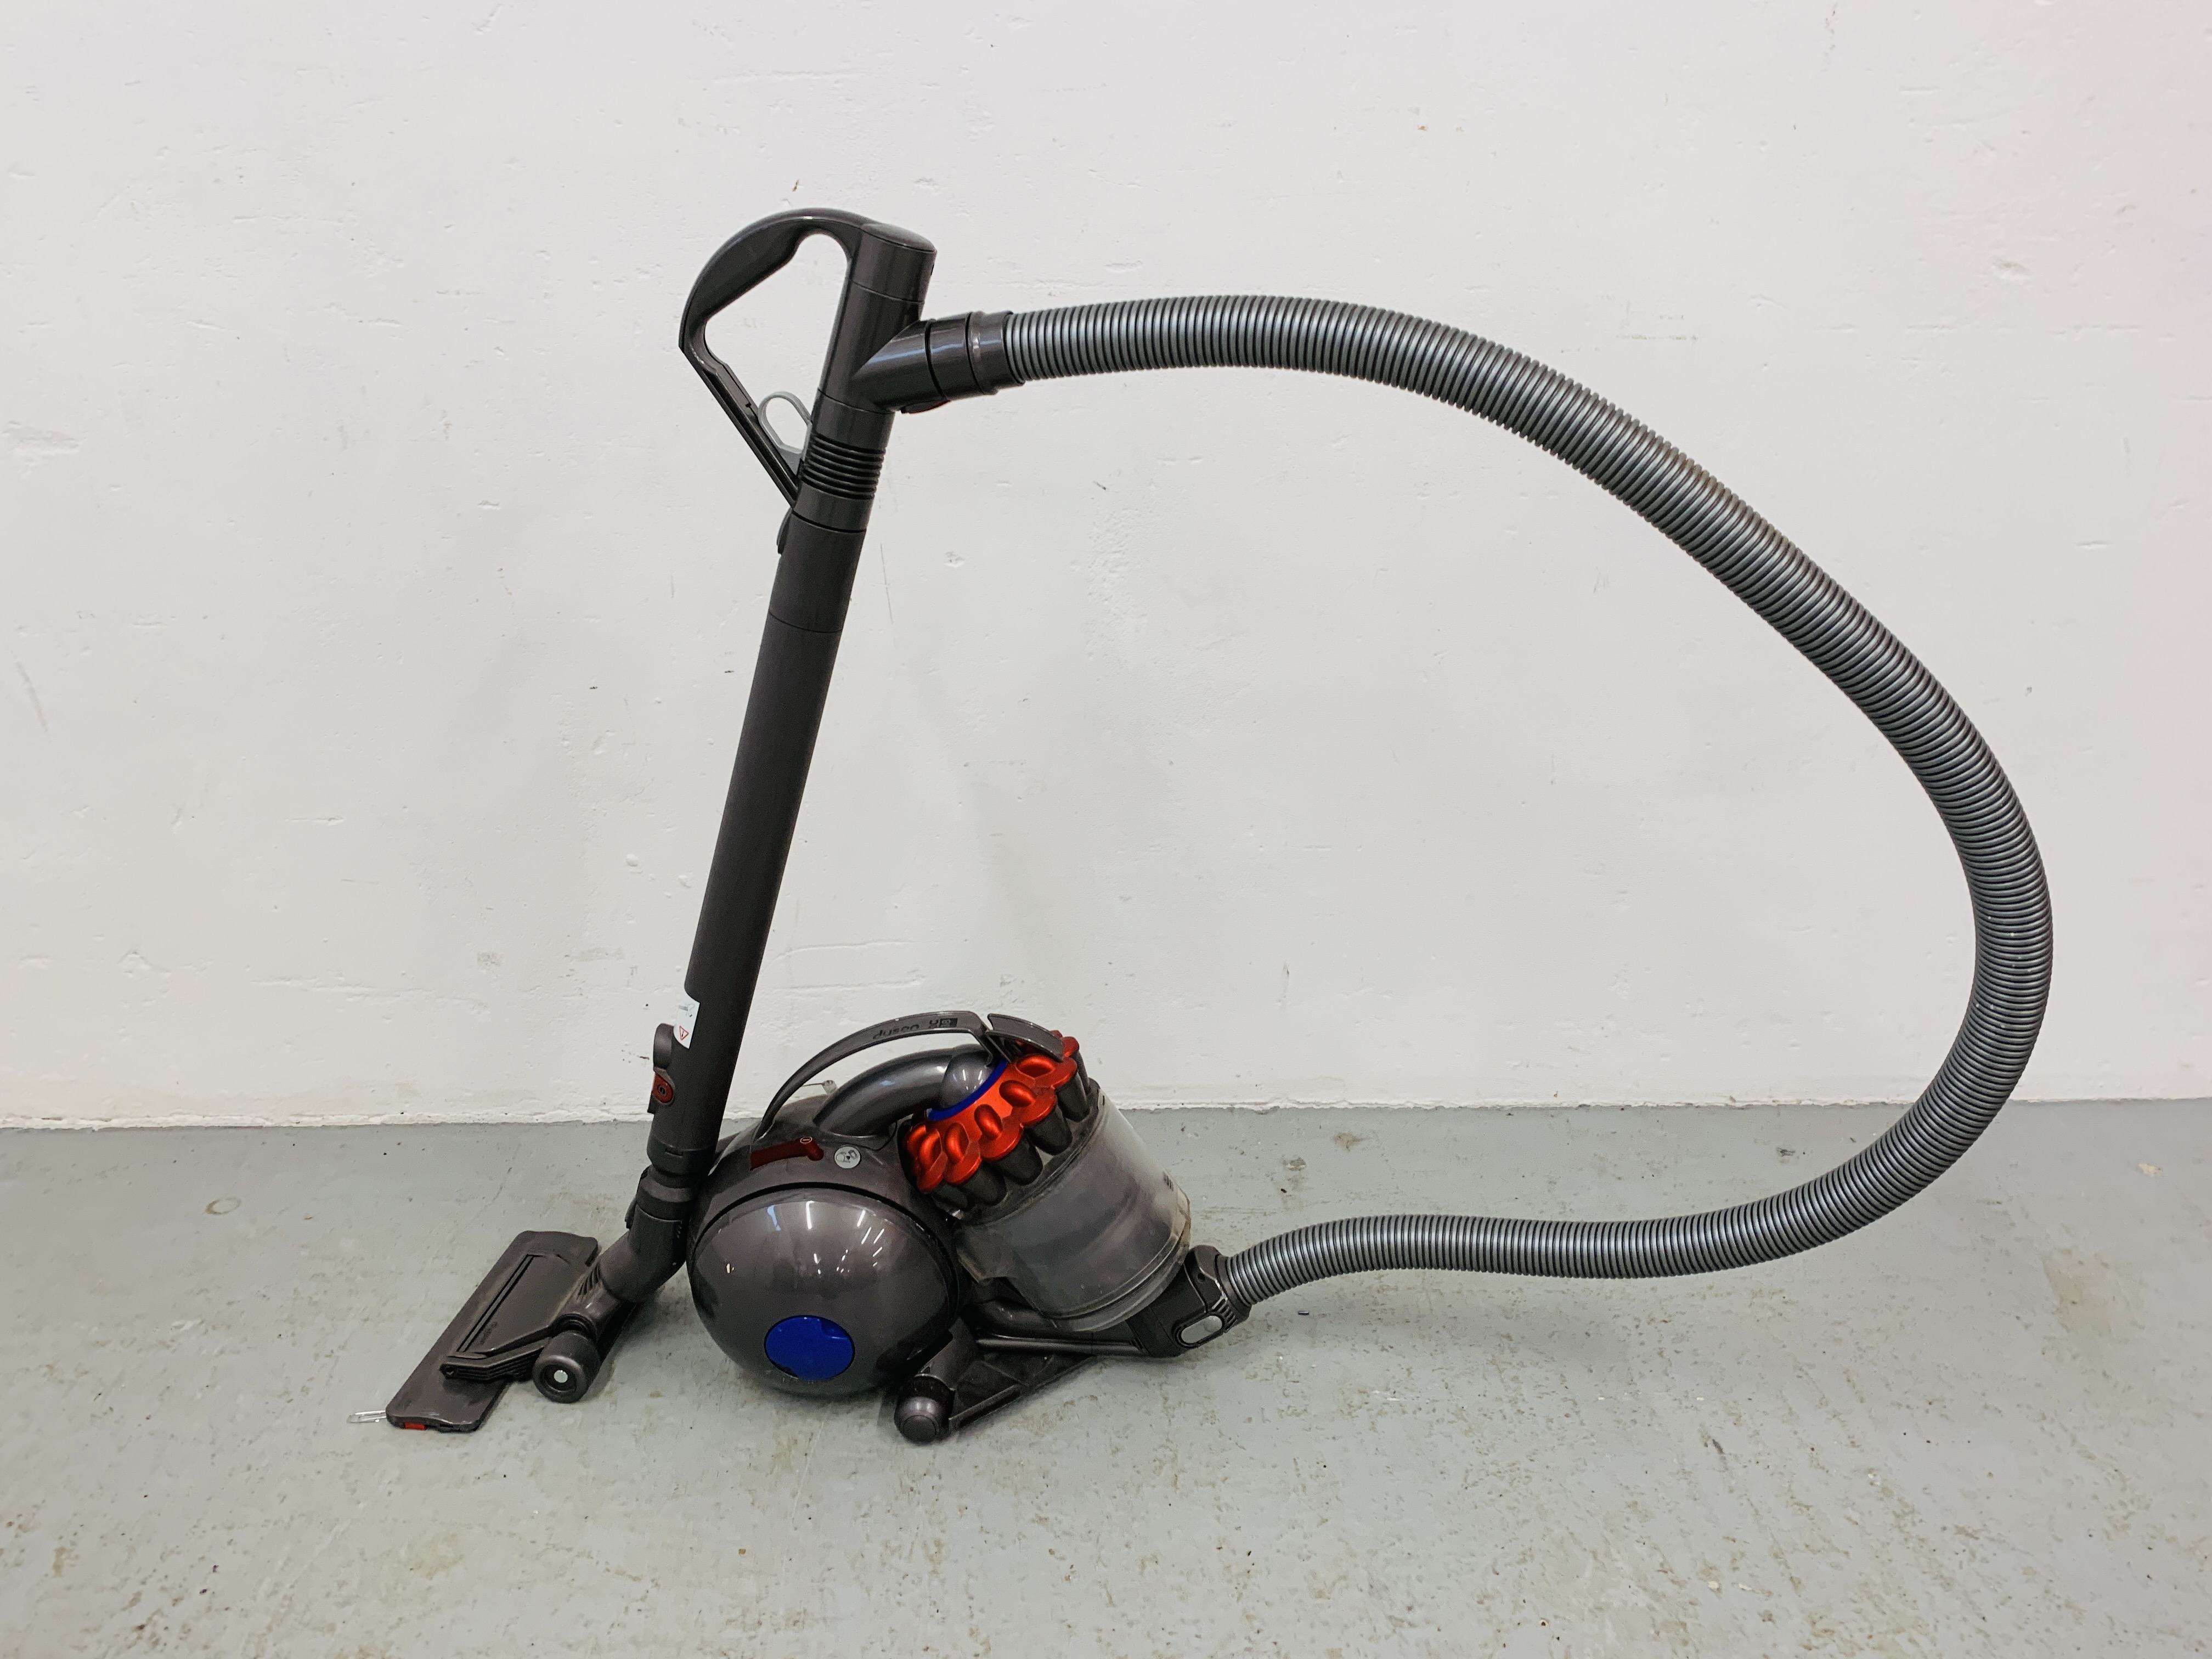 A DYSON DC38 BALL VACUUM CLEANER